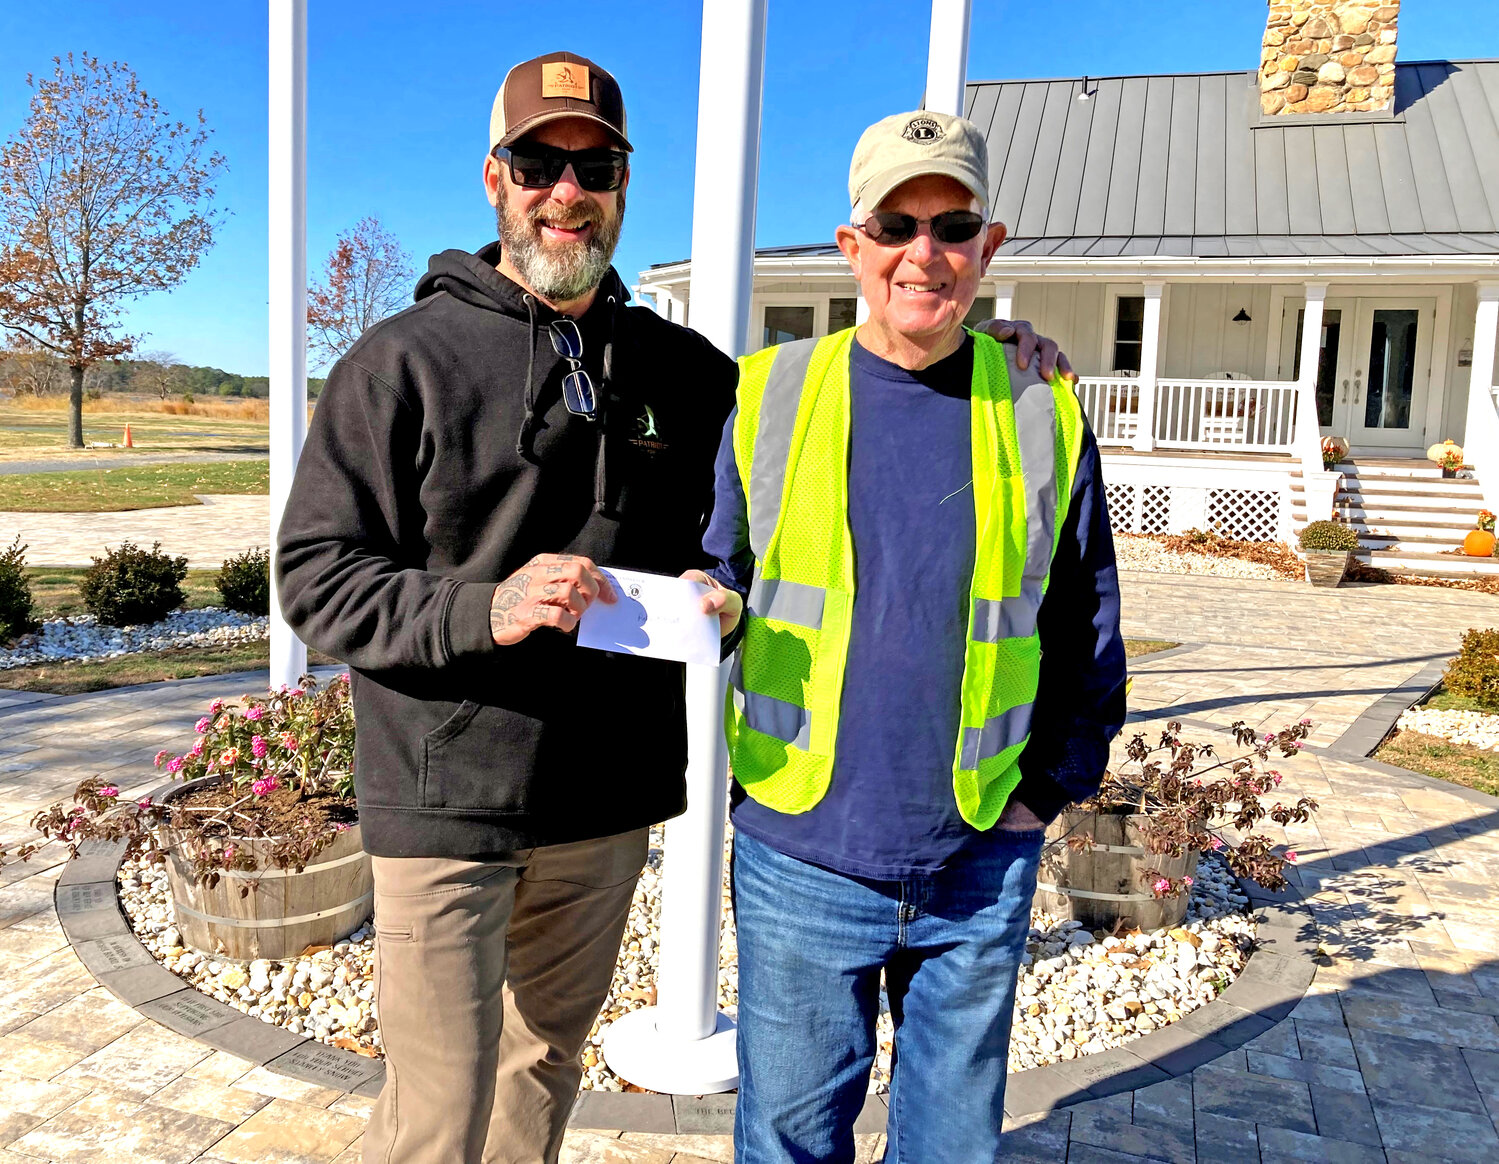 Cambridge Lions club President Gene Williams, at right, made a donation to Hugh Middleton of Patriots Point in Taylors Island. Patriots Point provides a healing place for military veterans.